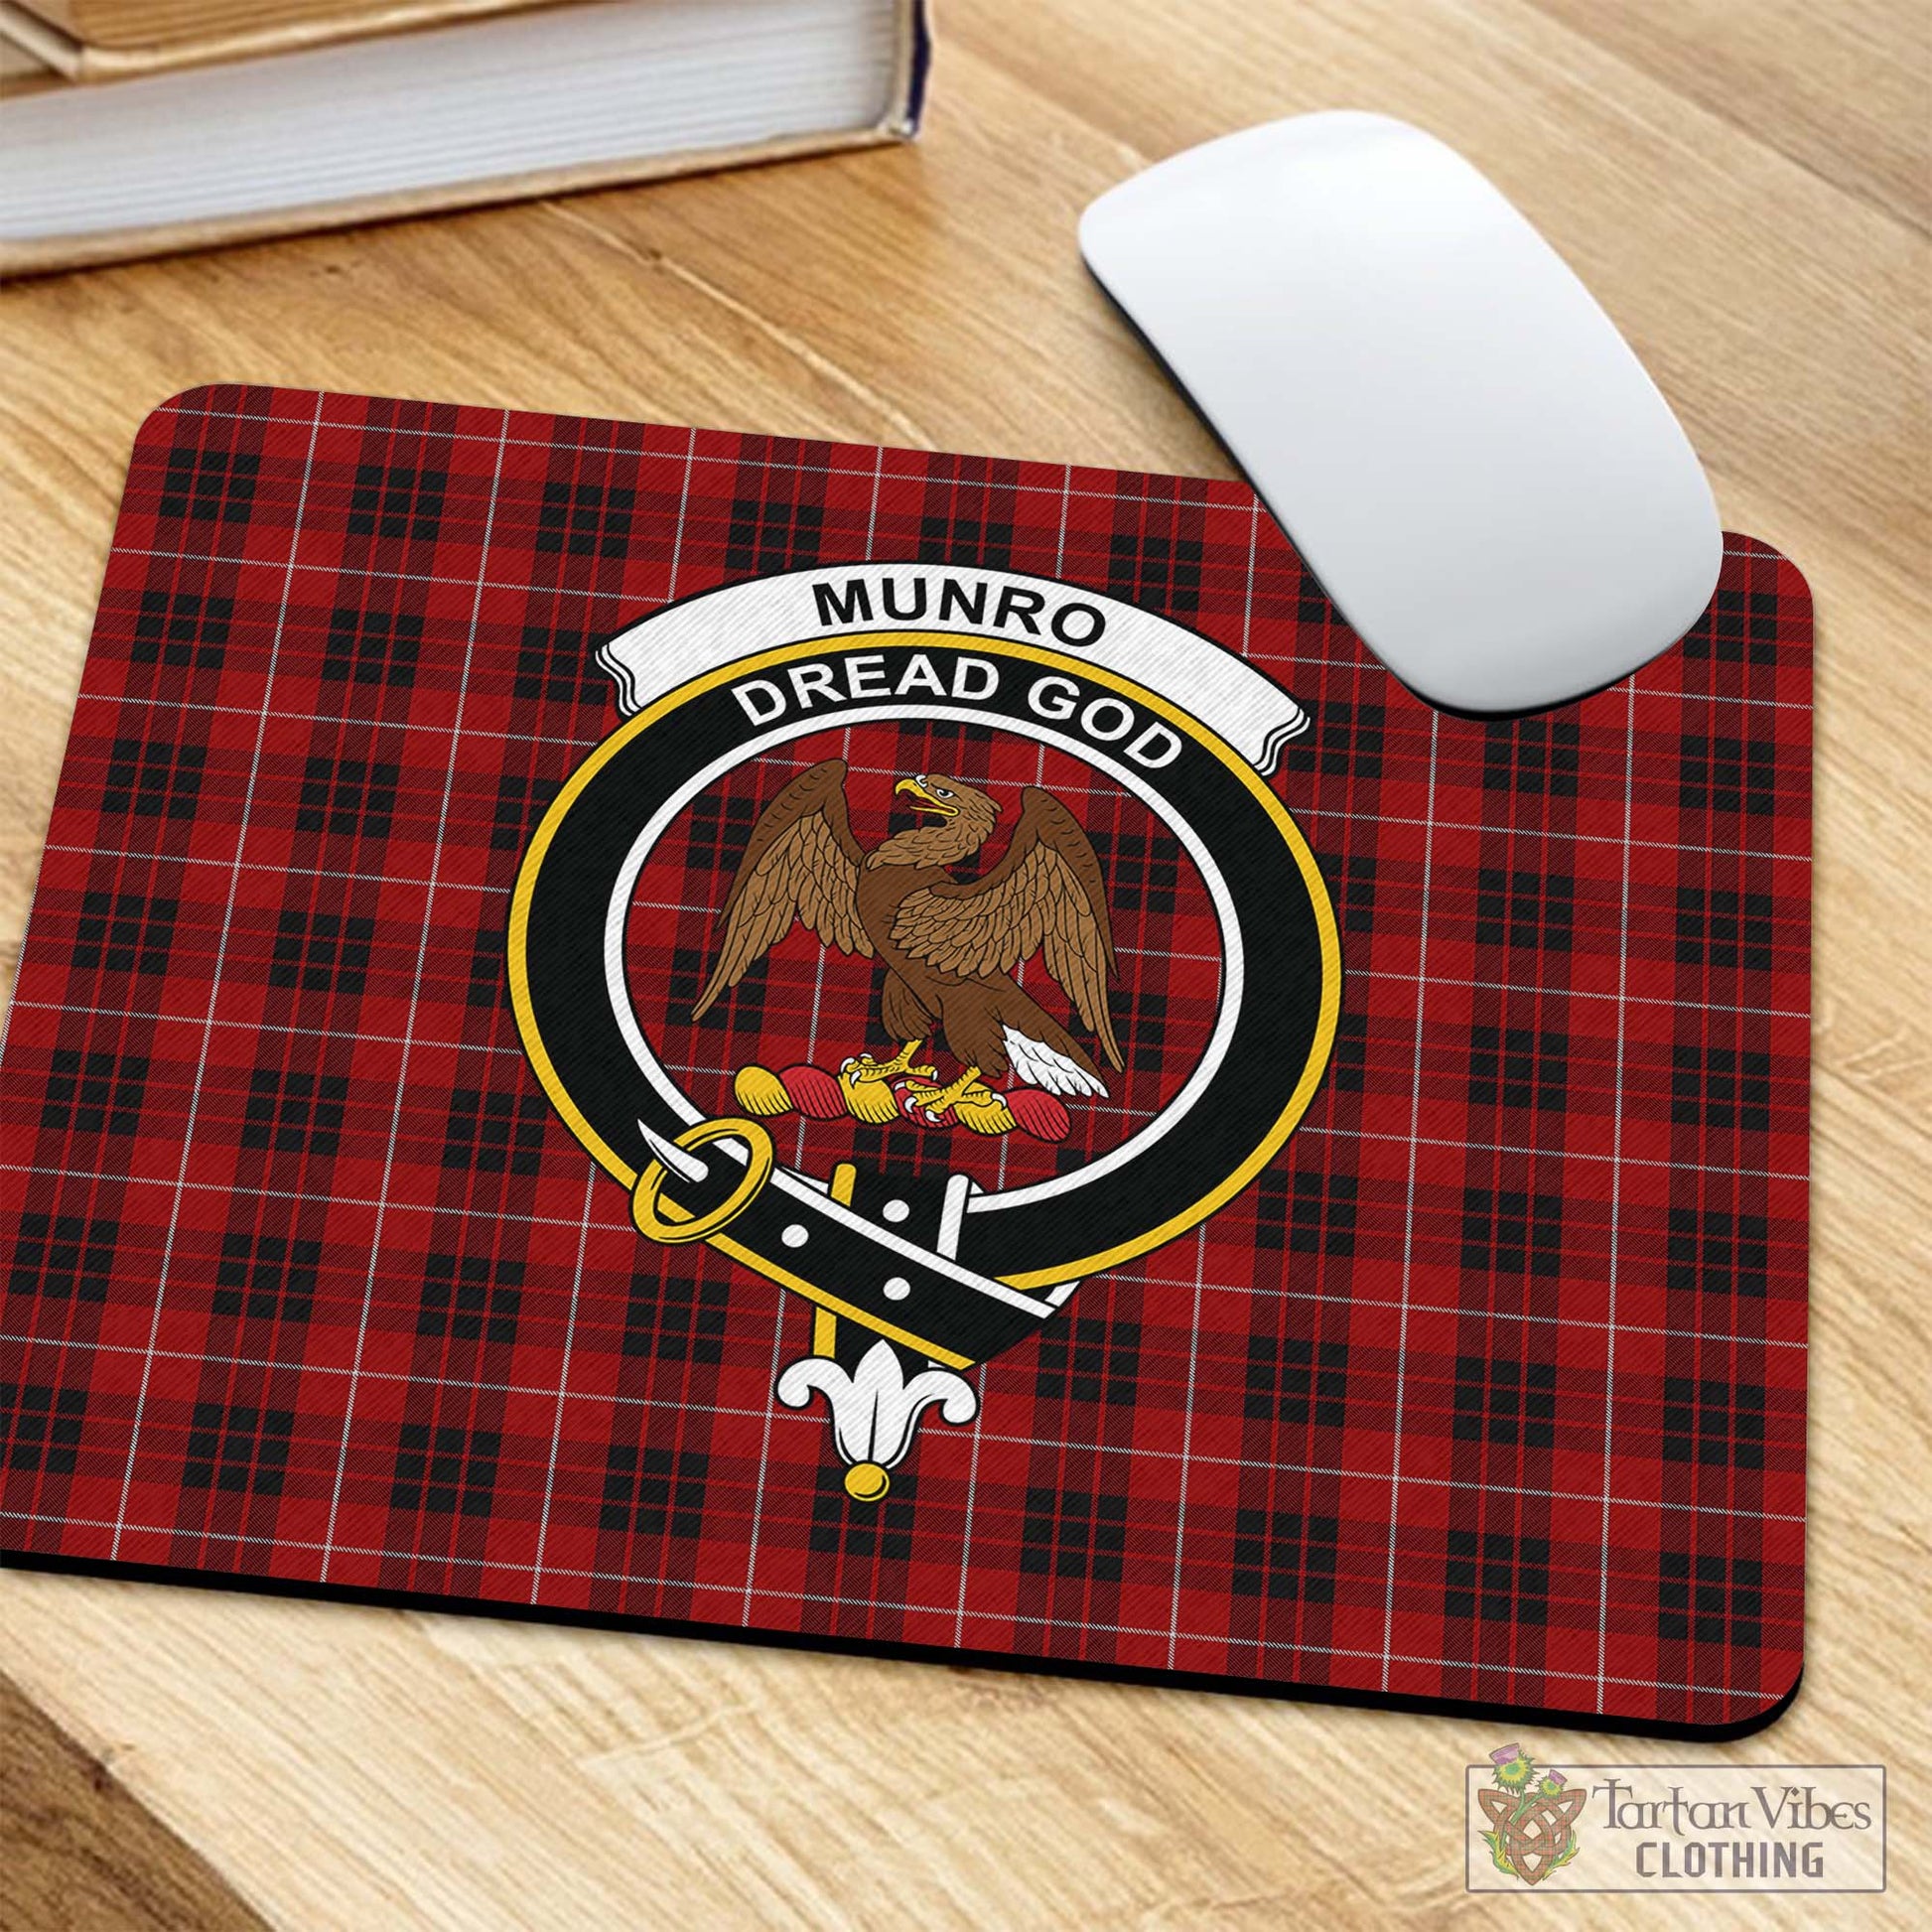 Tartan Vibes Clothing Munro Black and Red Tartan Mouse Pad with Family Crest